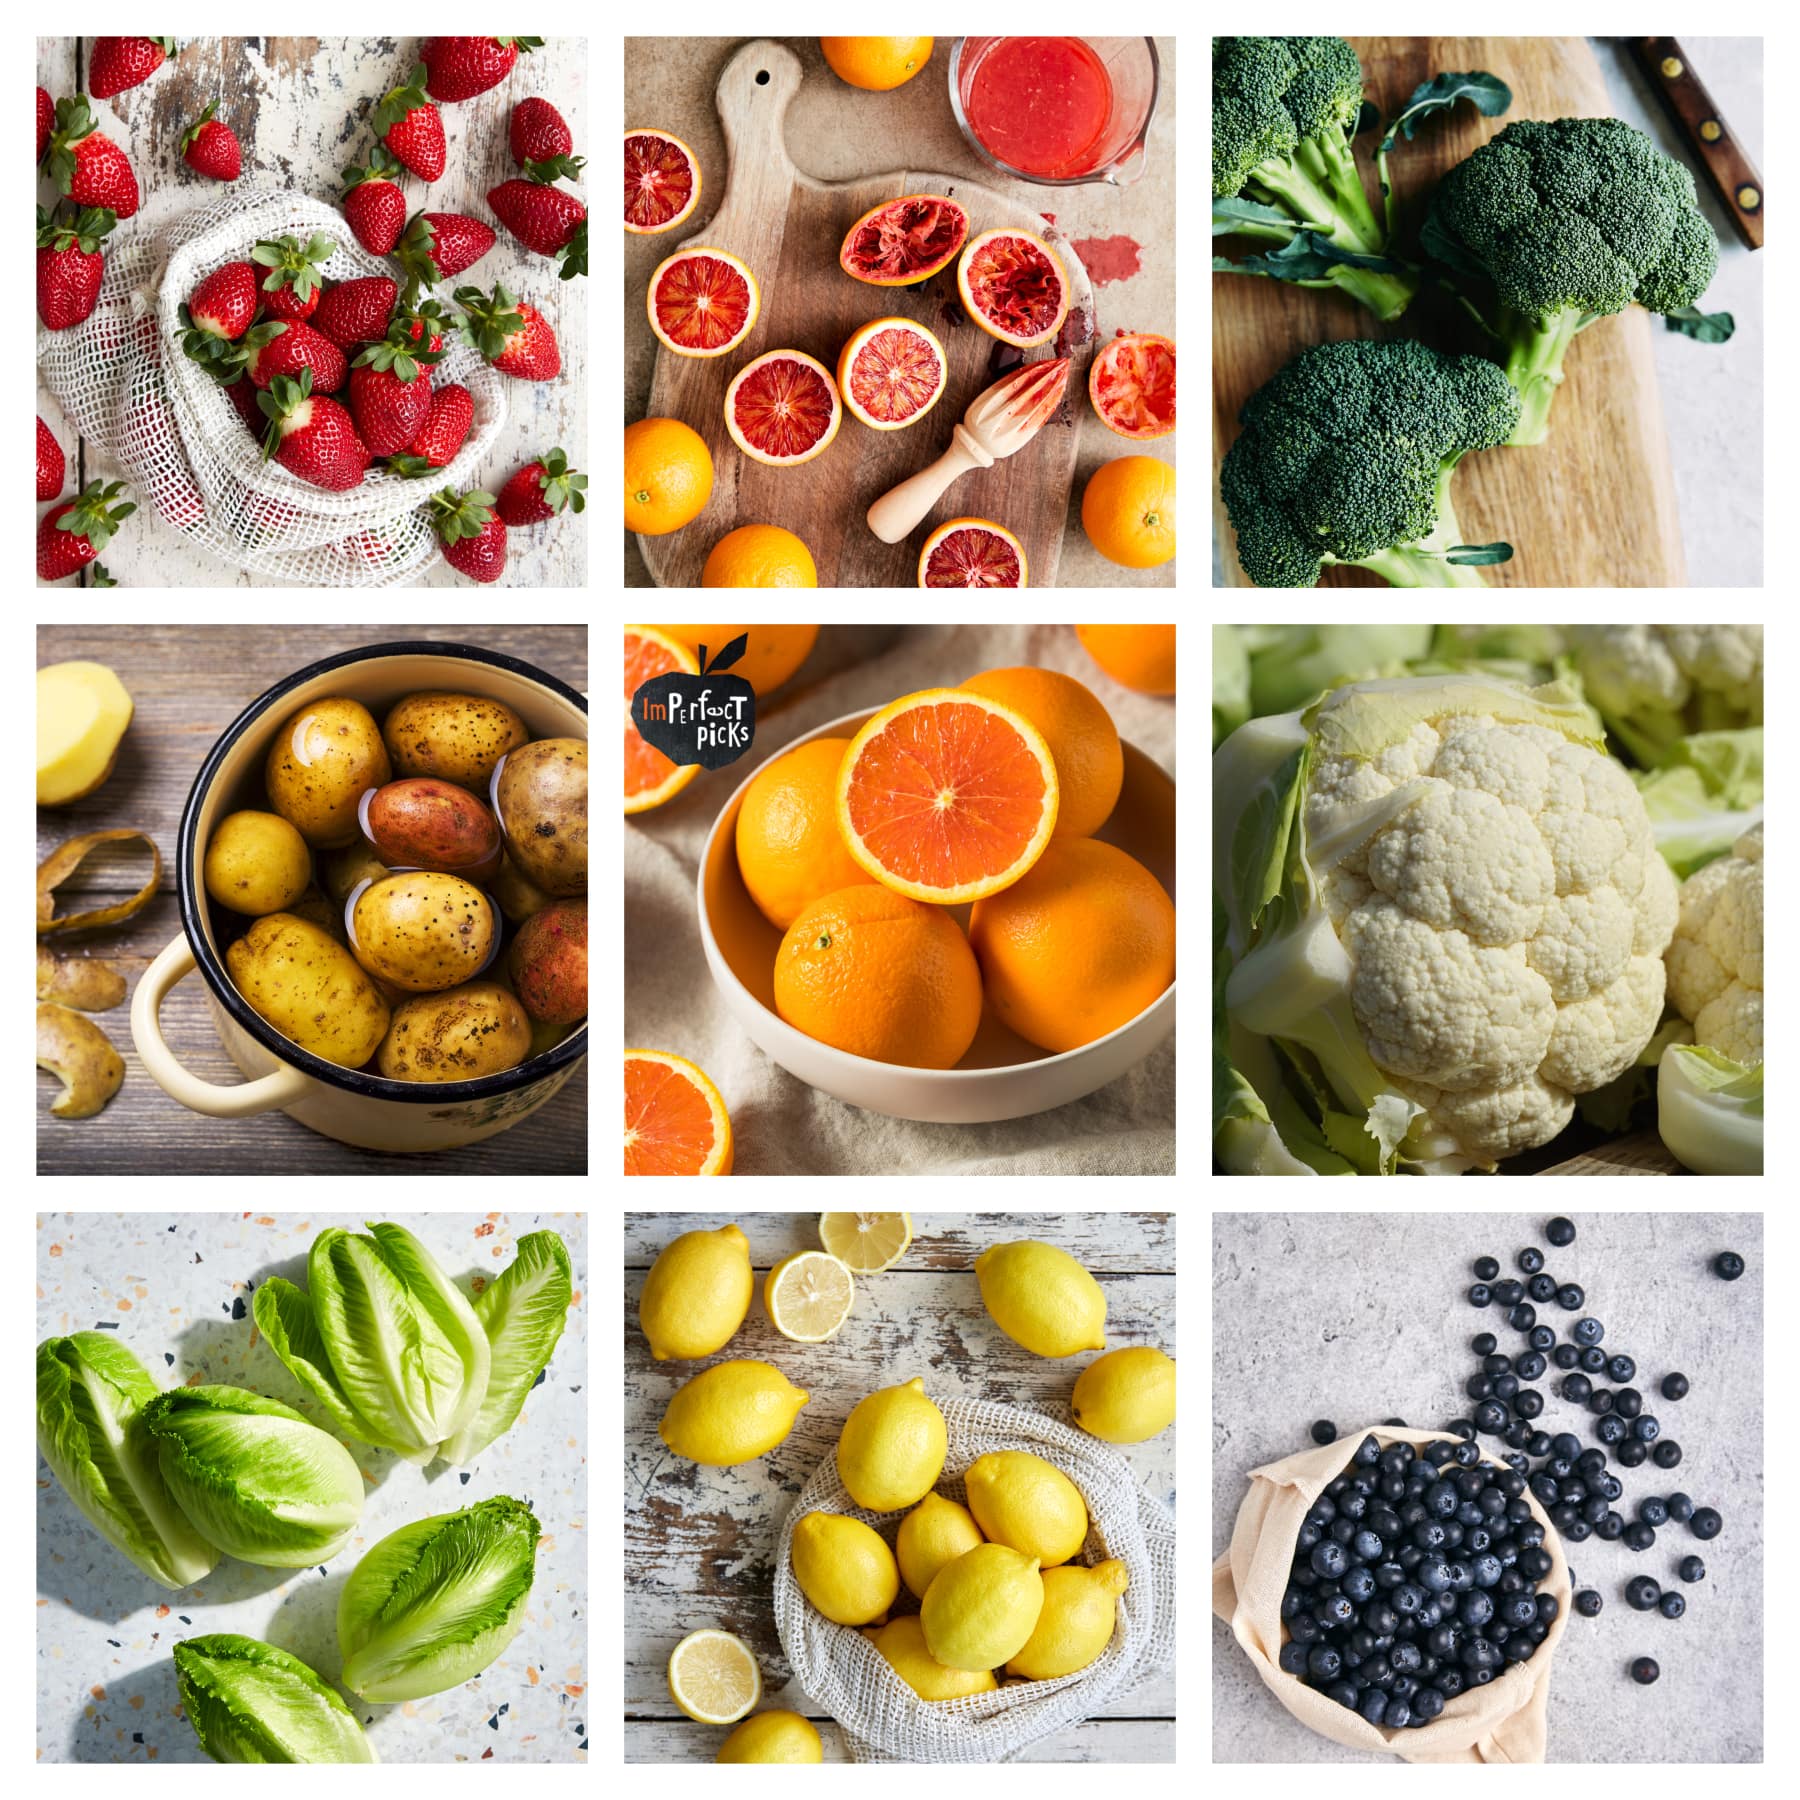 Dave's Market Update for the 9th of August 2023 includes strawberries, blood oranges, broccoli, brushed potatoes, imperfect navel oranges, cauliflower, midi cos lettuce, imperfect lemons, and blueberries.